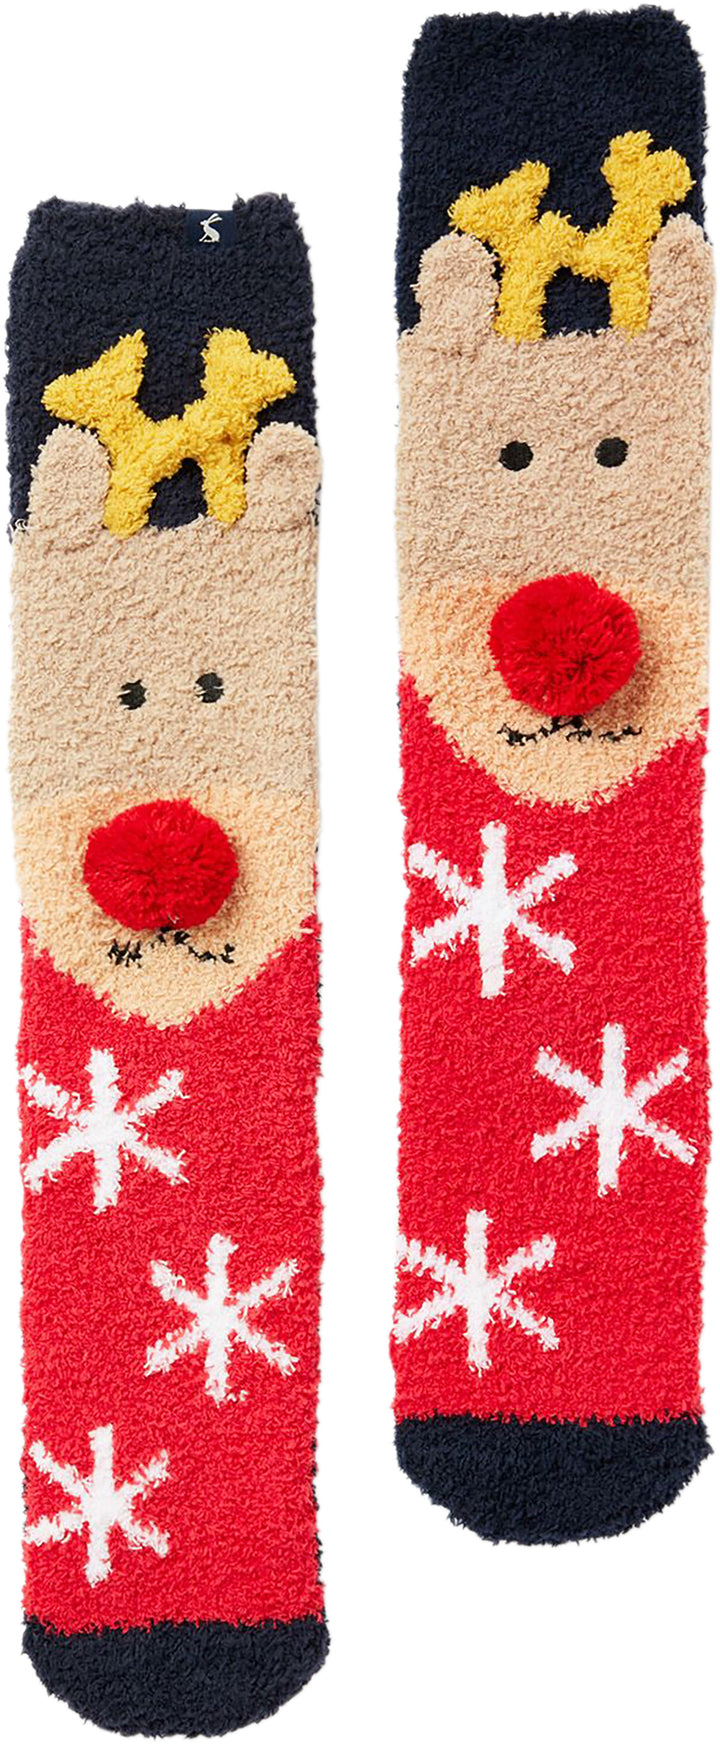 Joules Festive Fluffy In Red Reindeer